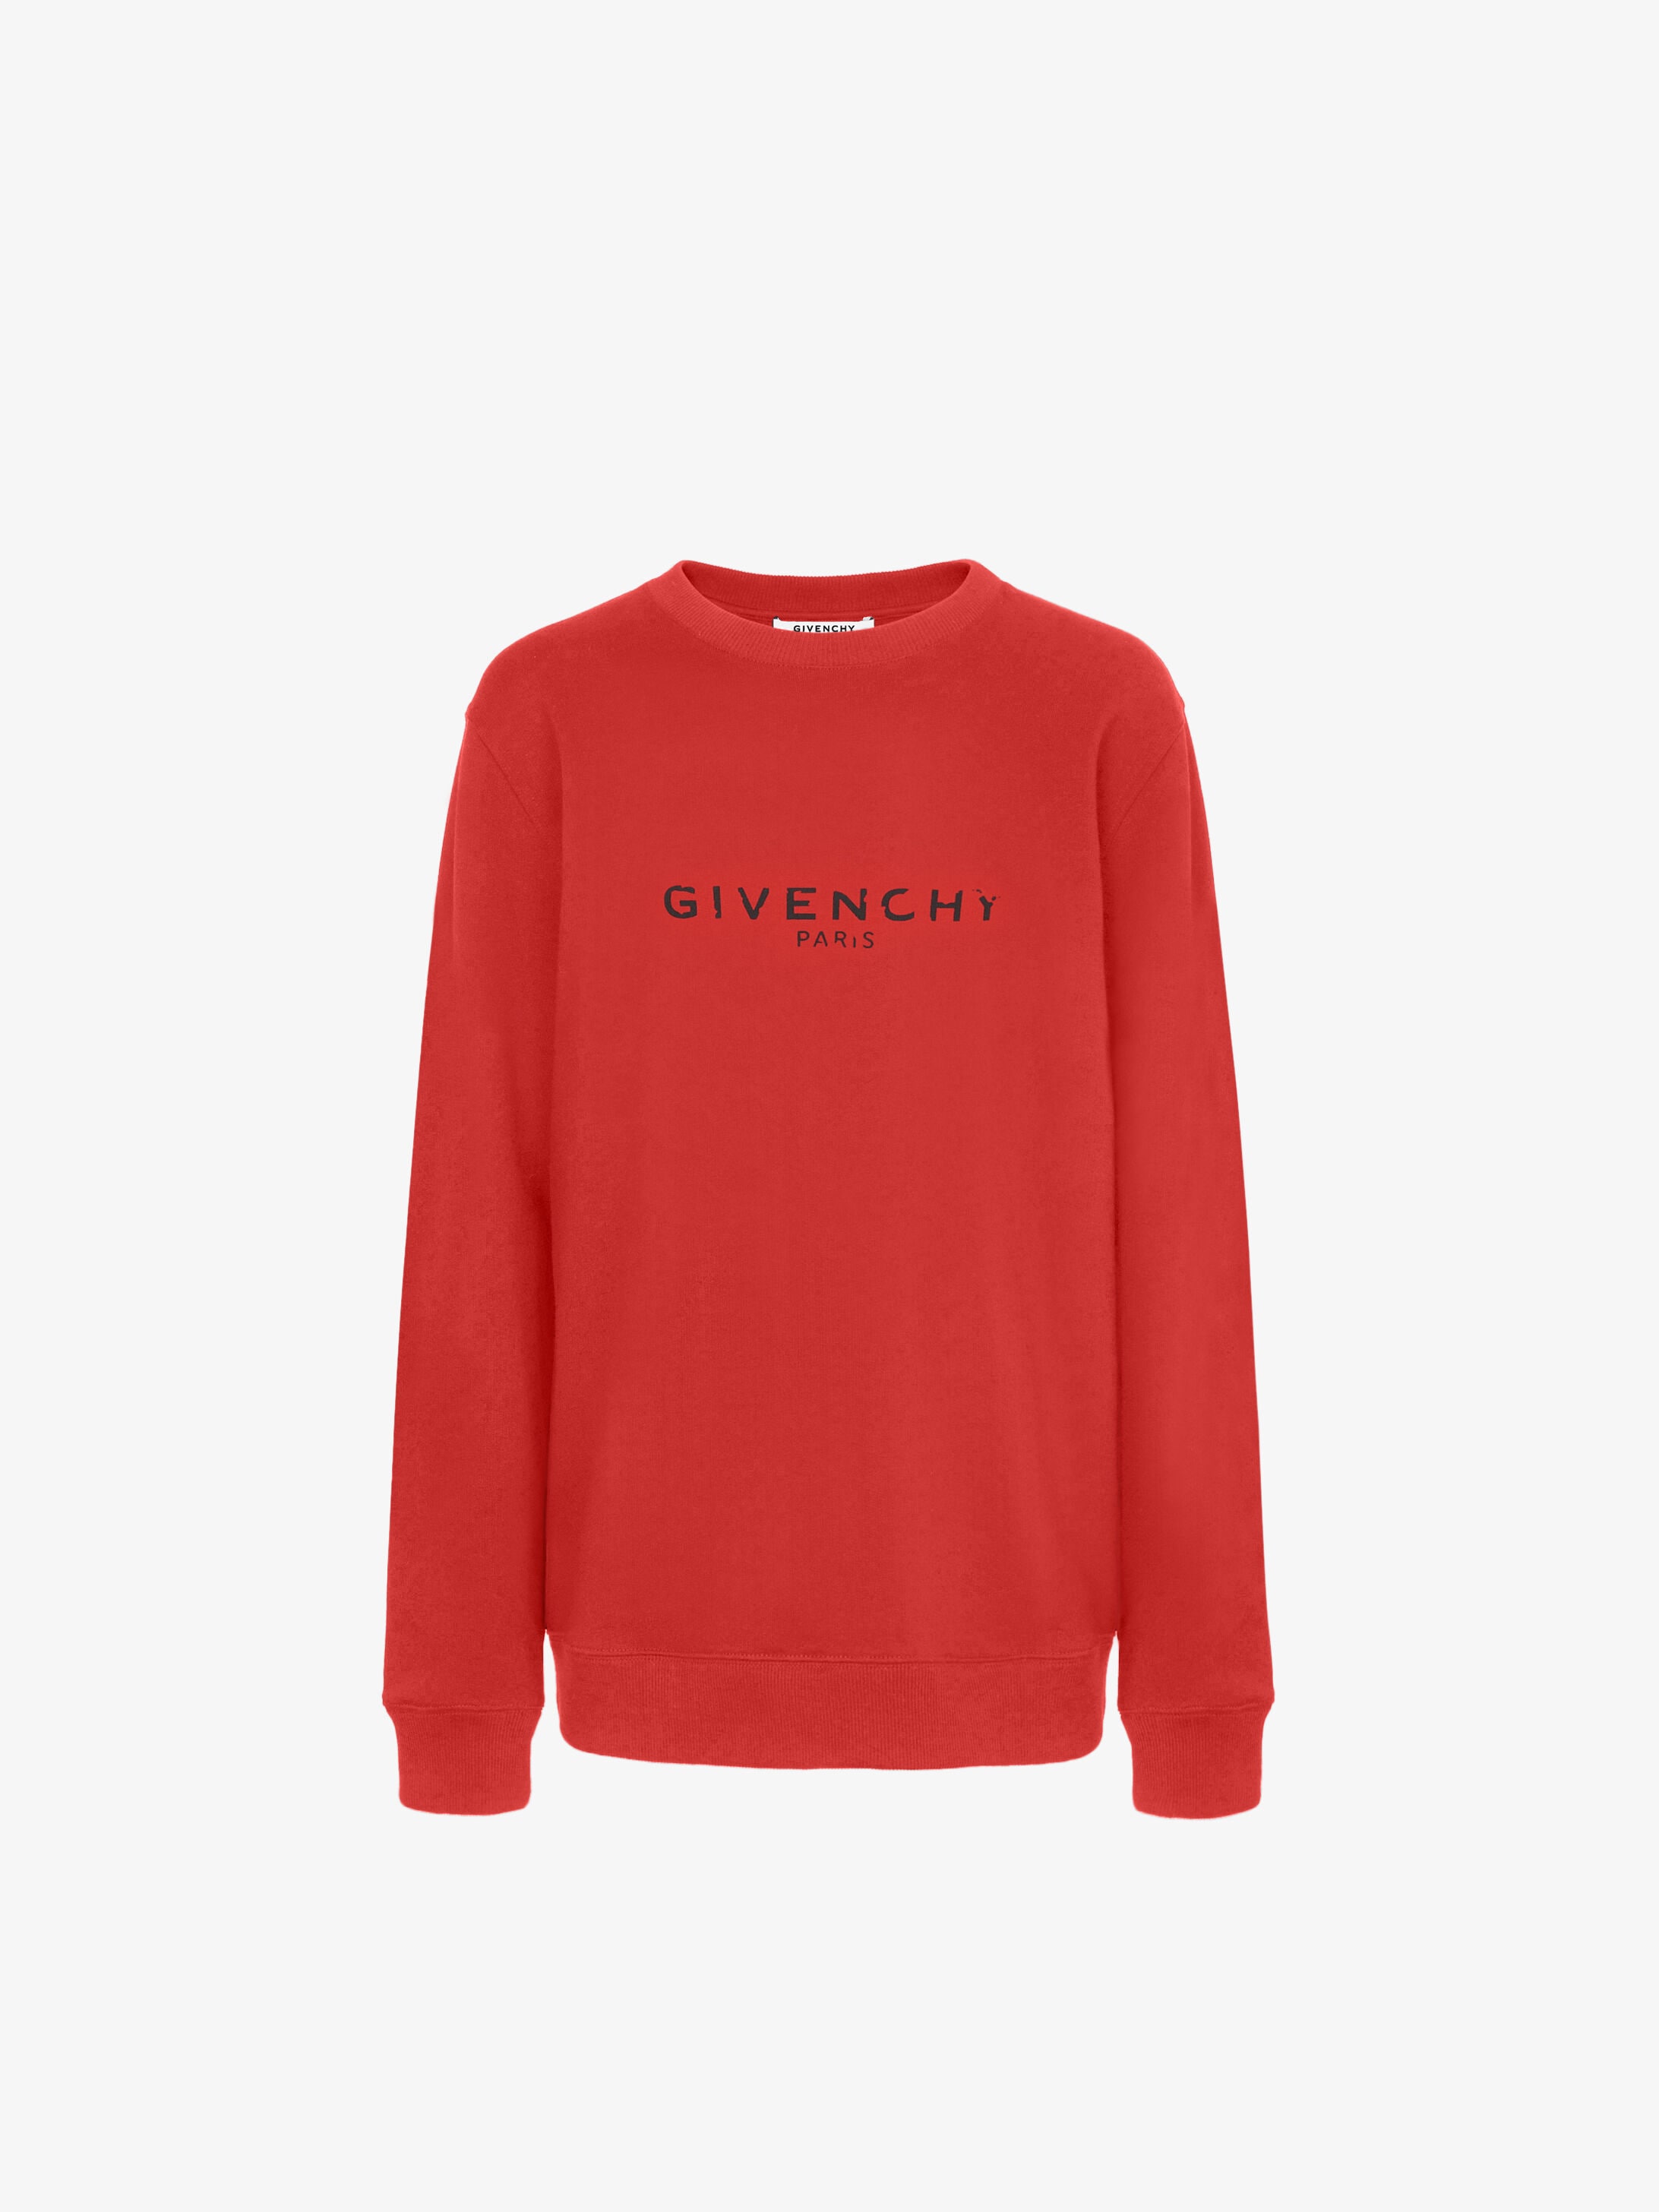 Givenchy Crewneck Red Top Sellers, 53% OFF | www.ingeniovirtual.com